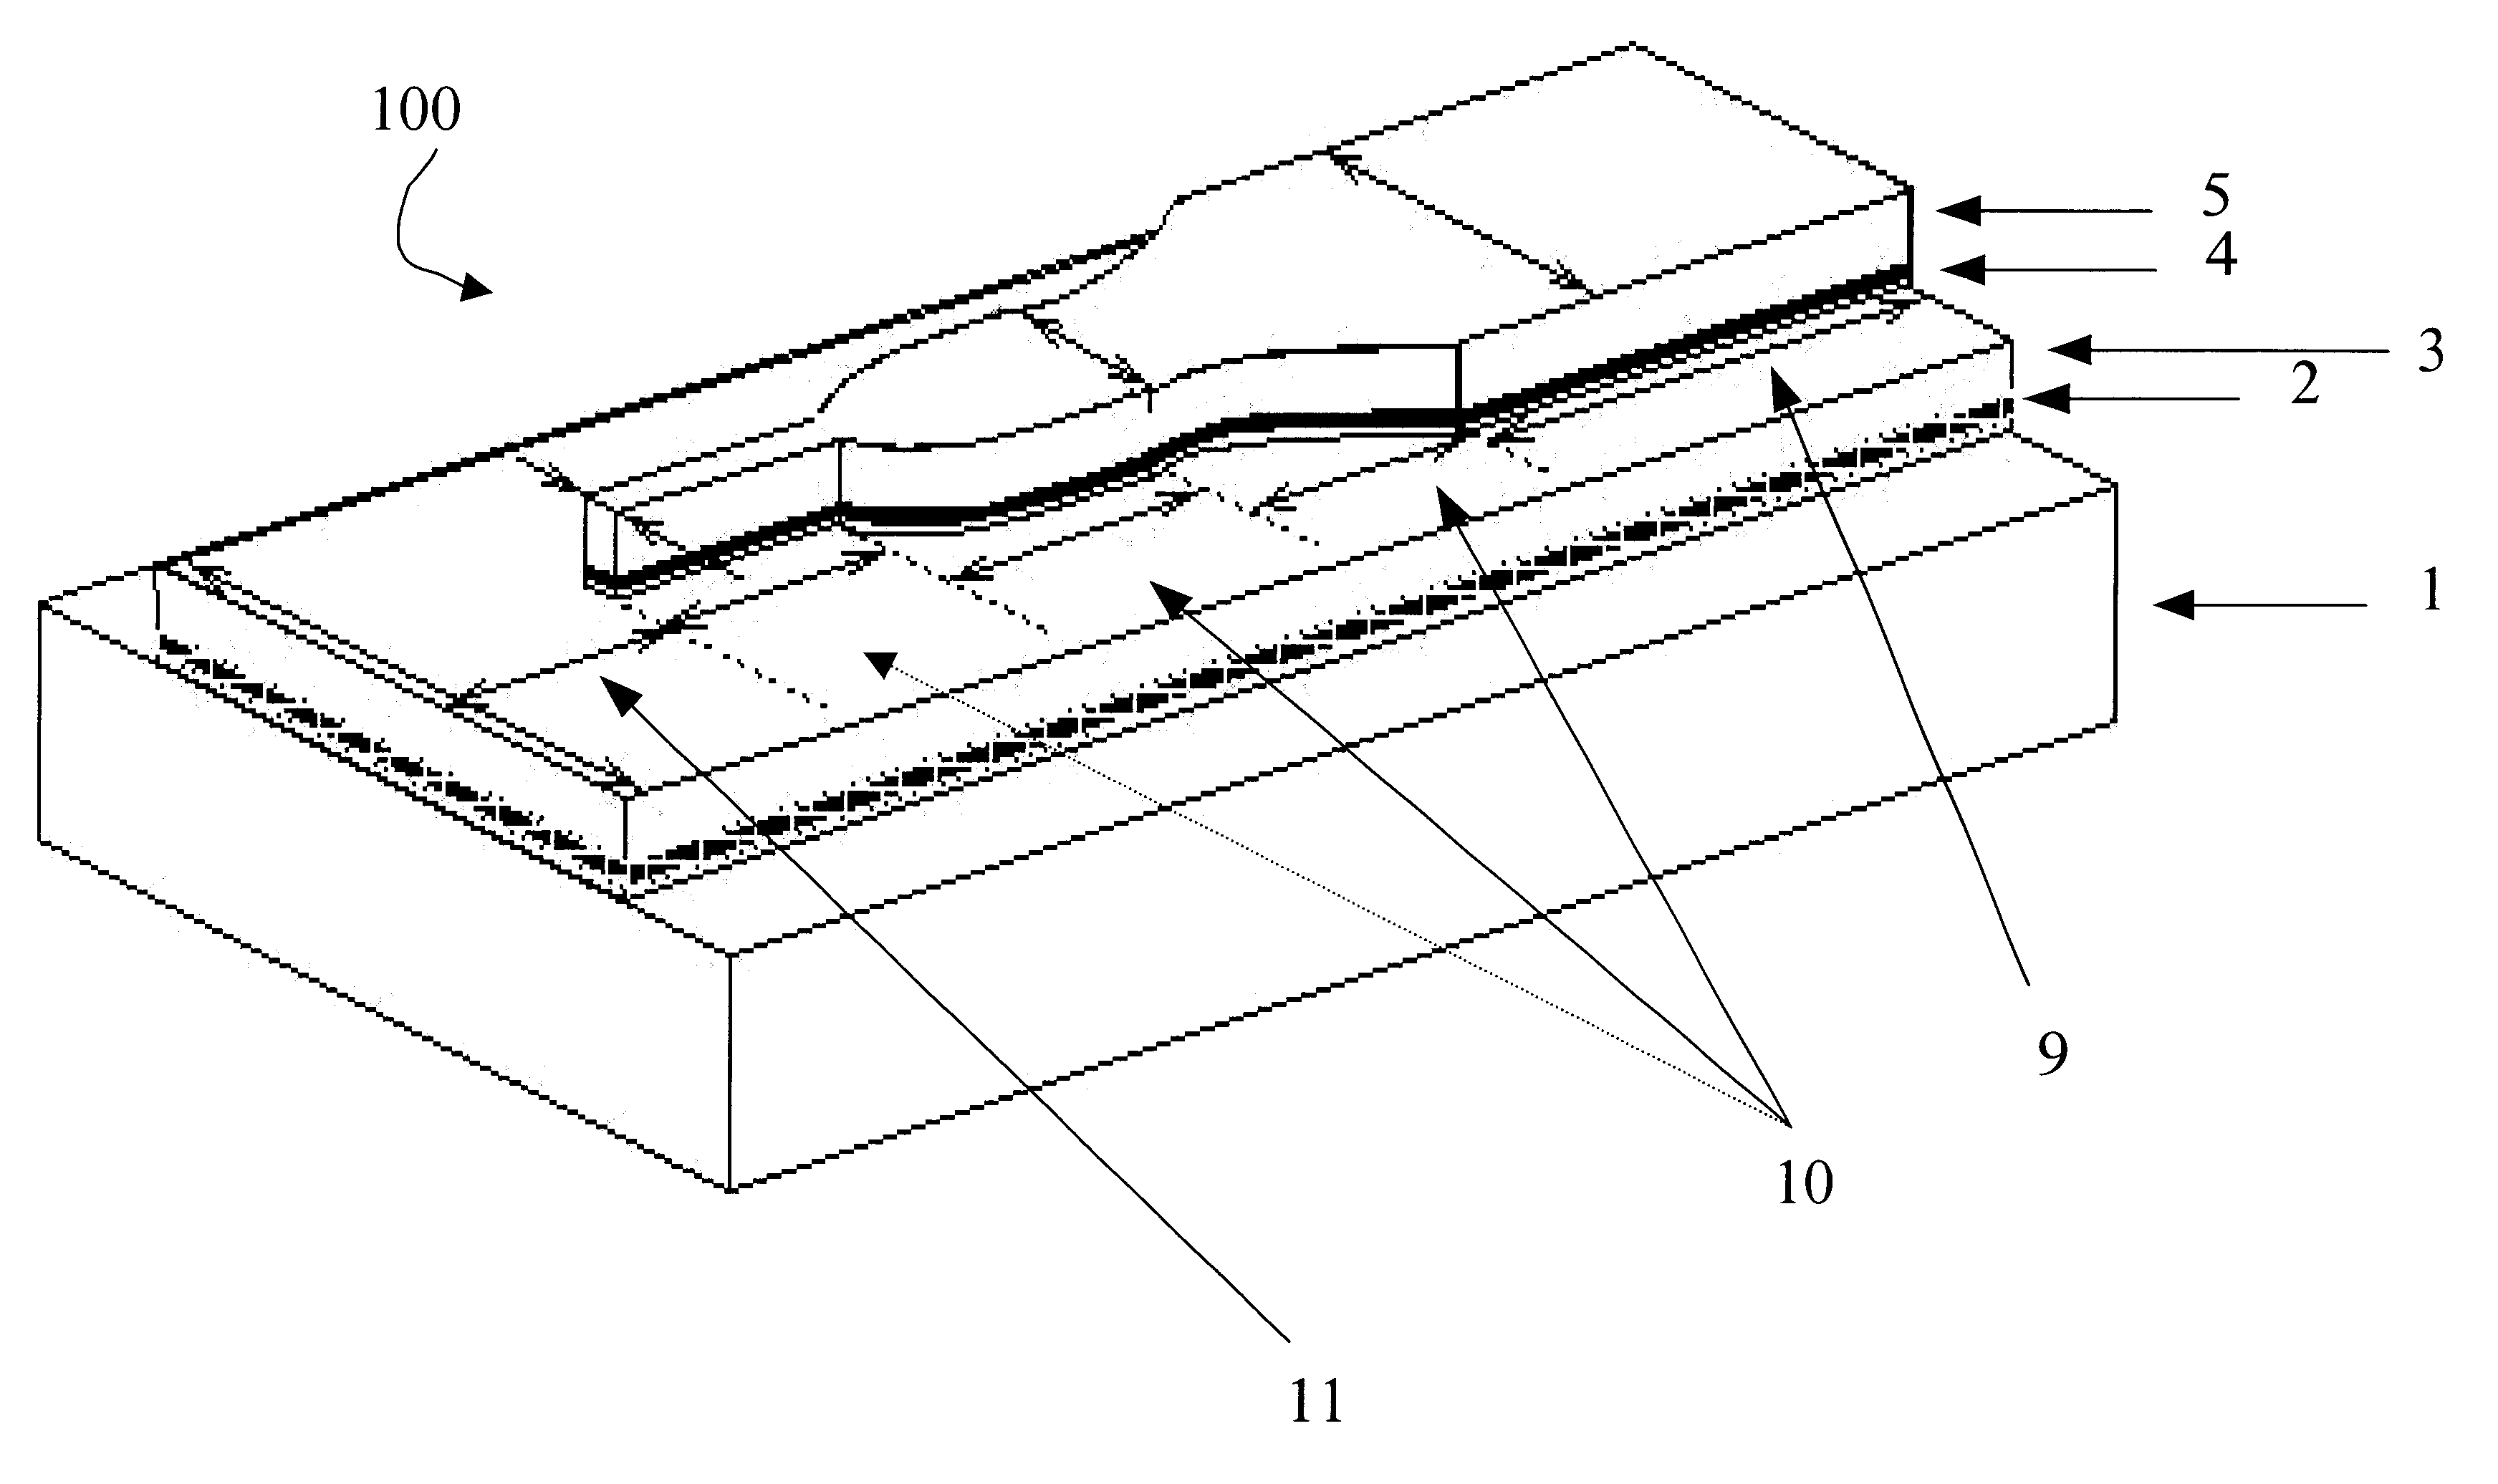 Semiconductor optical device with improved efficiency and output beam characteristics